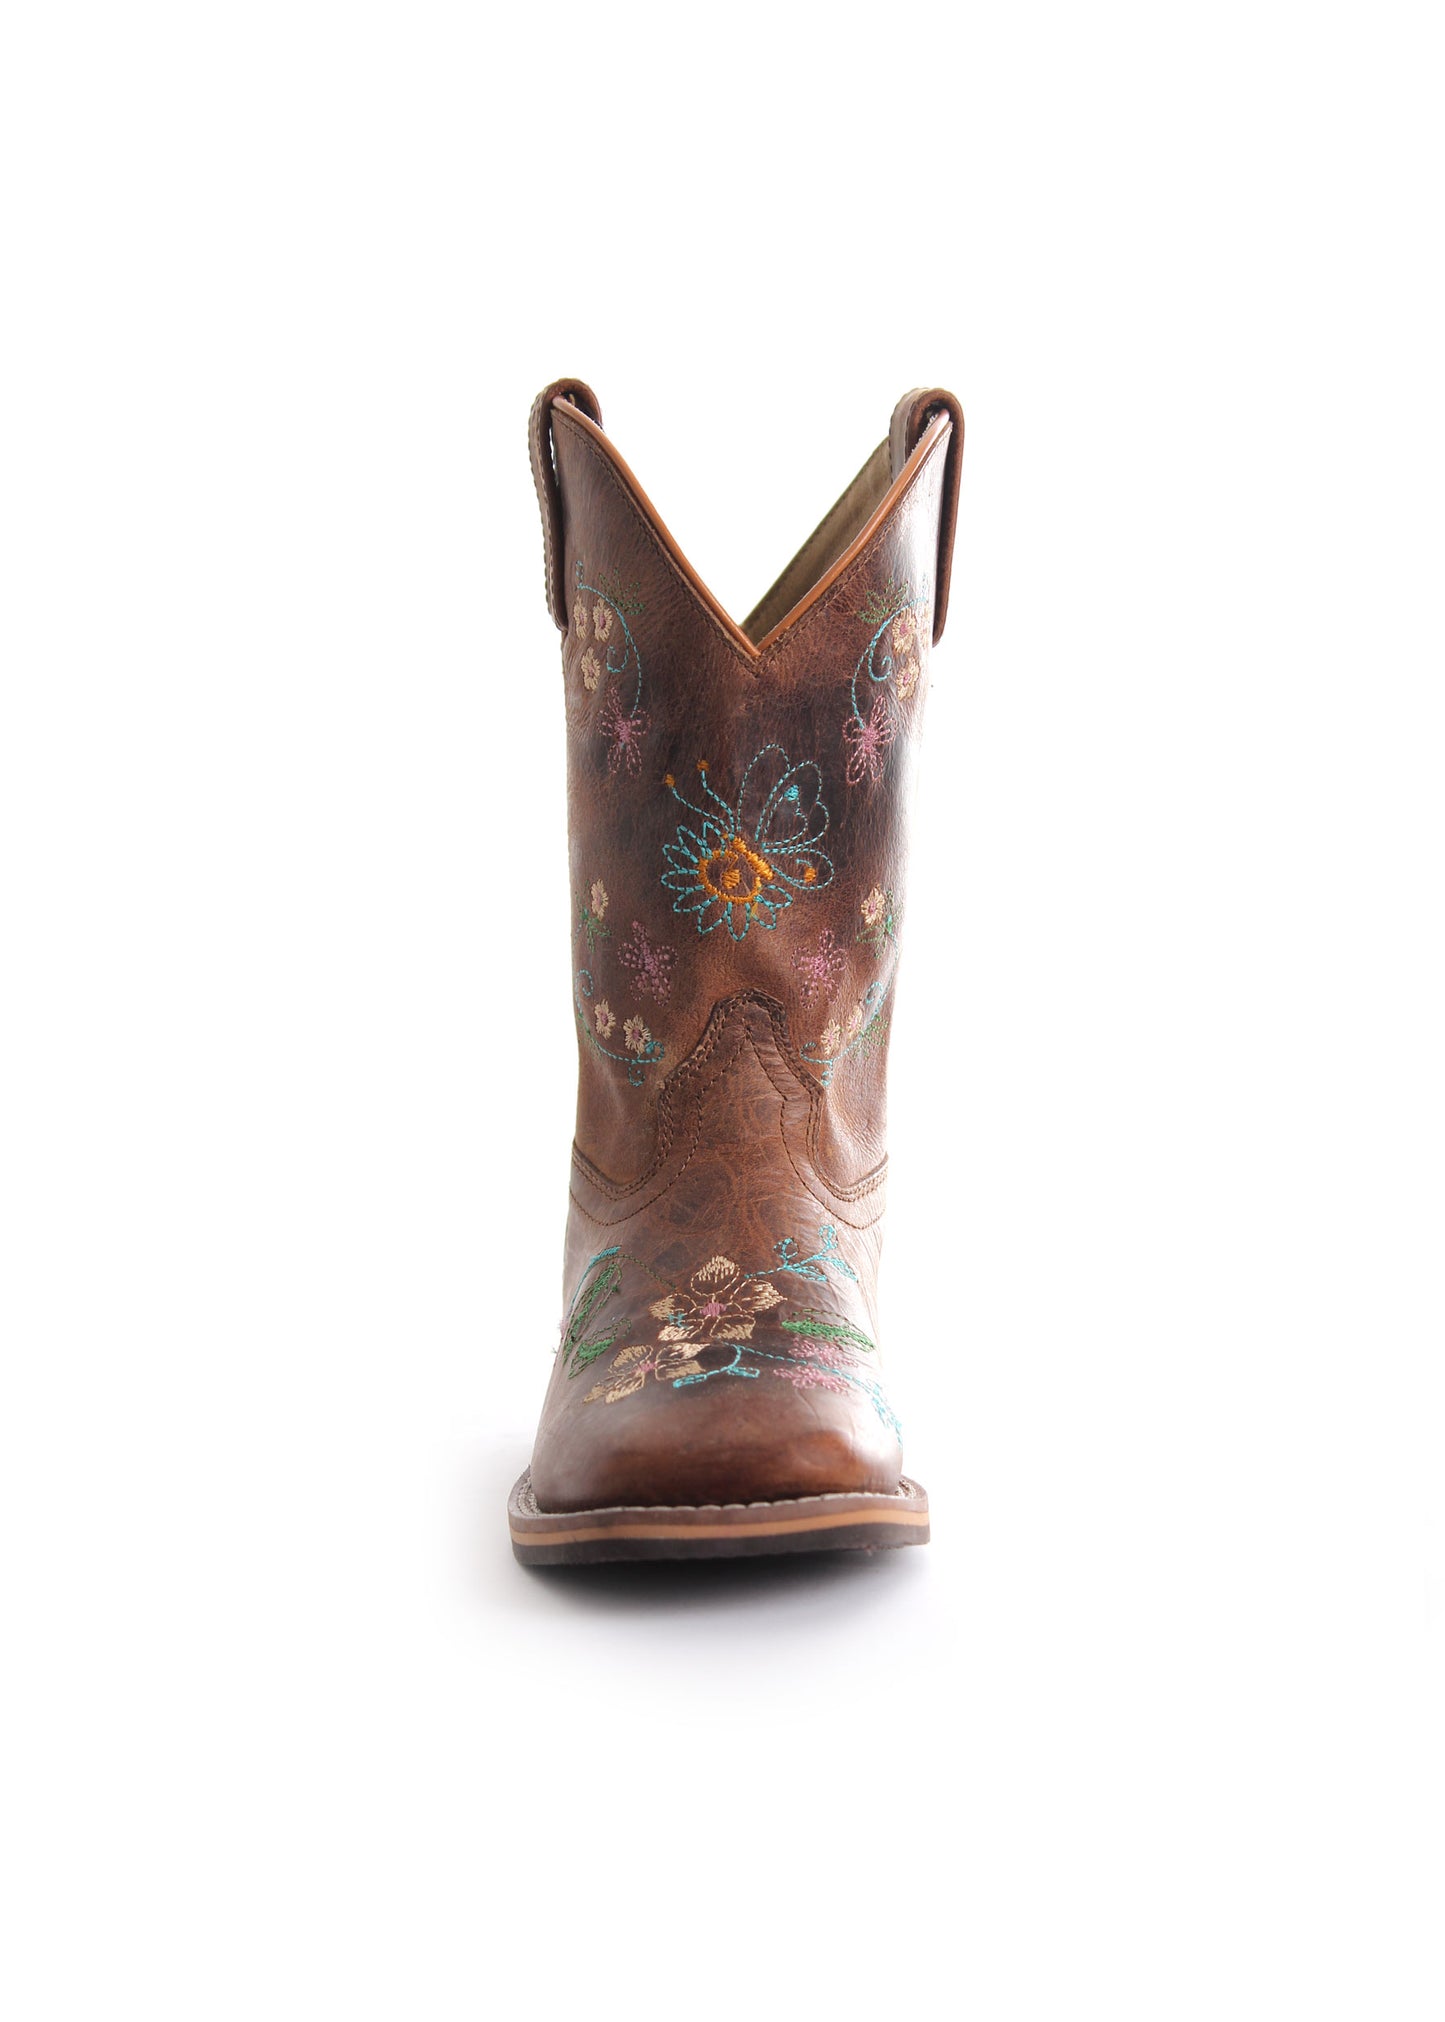 Pure Western Childrens Boots (Maybelle) - Oil Distressed Brown/Floral